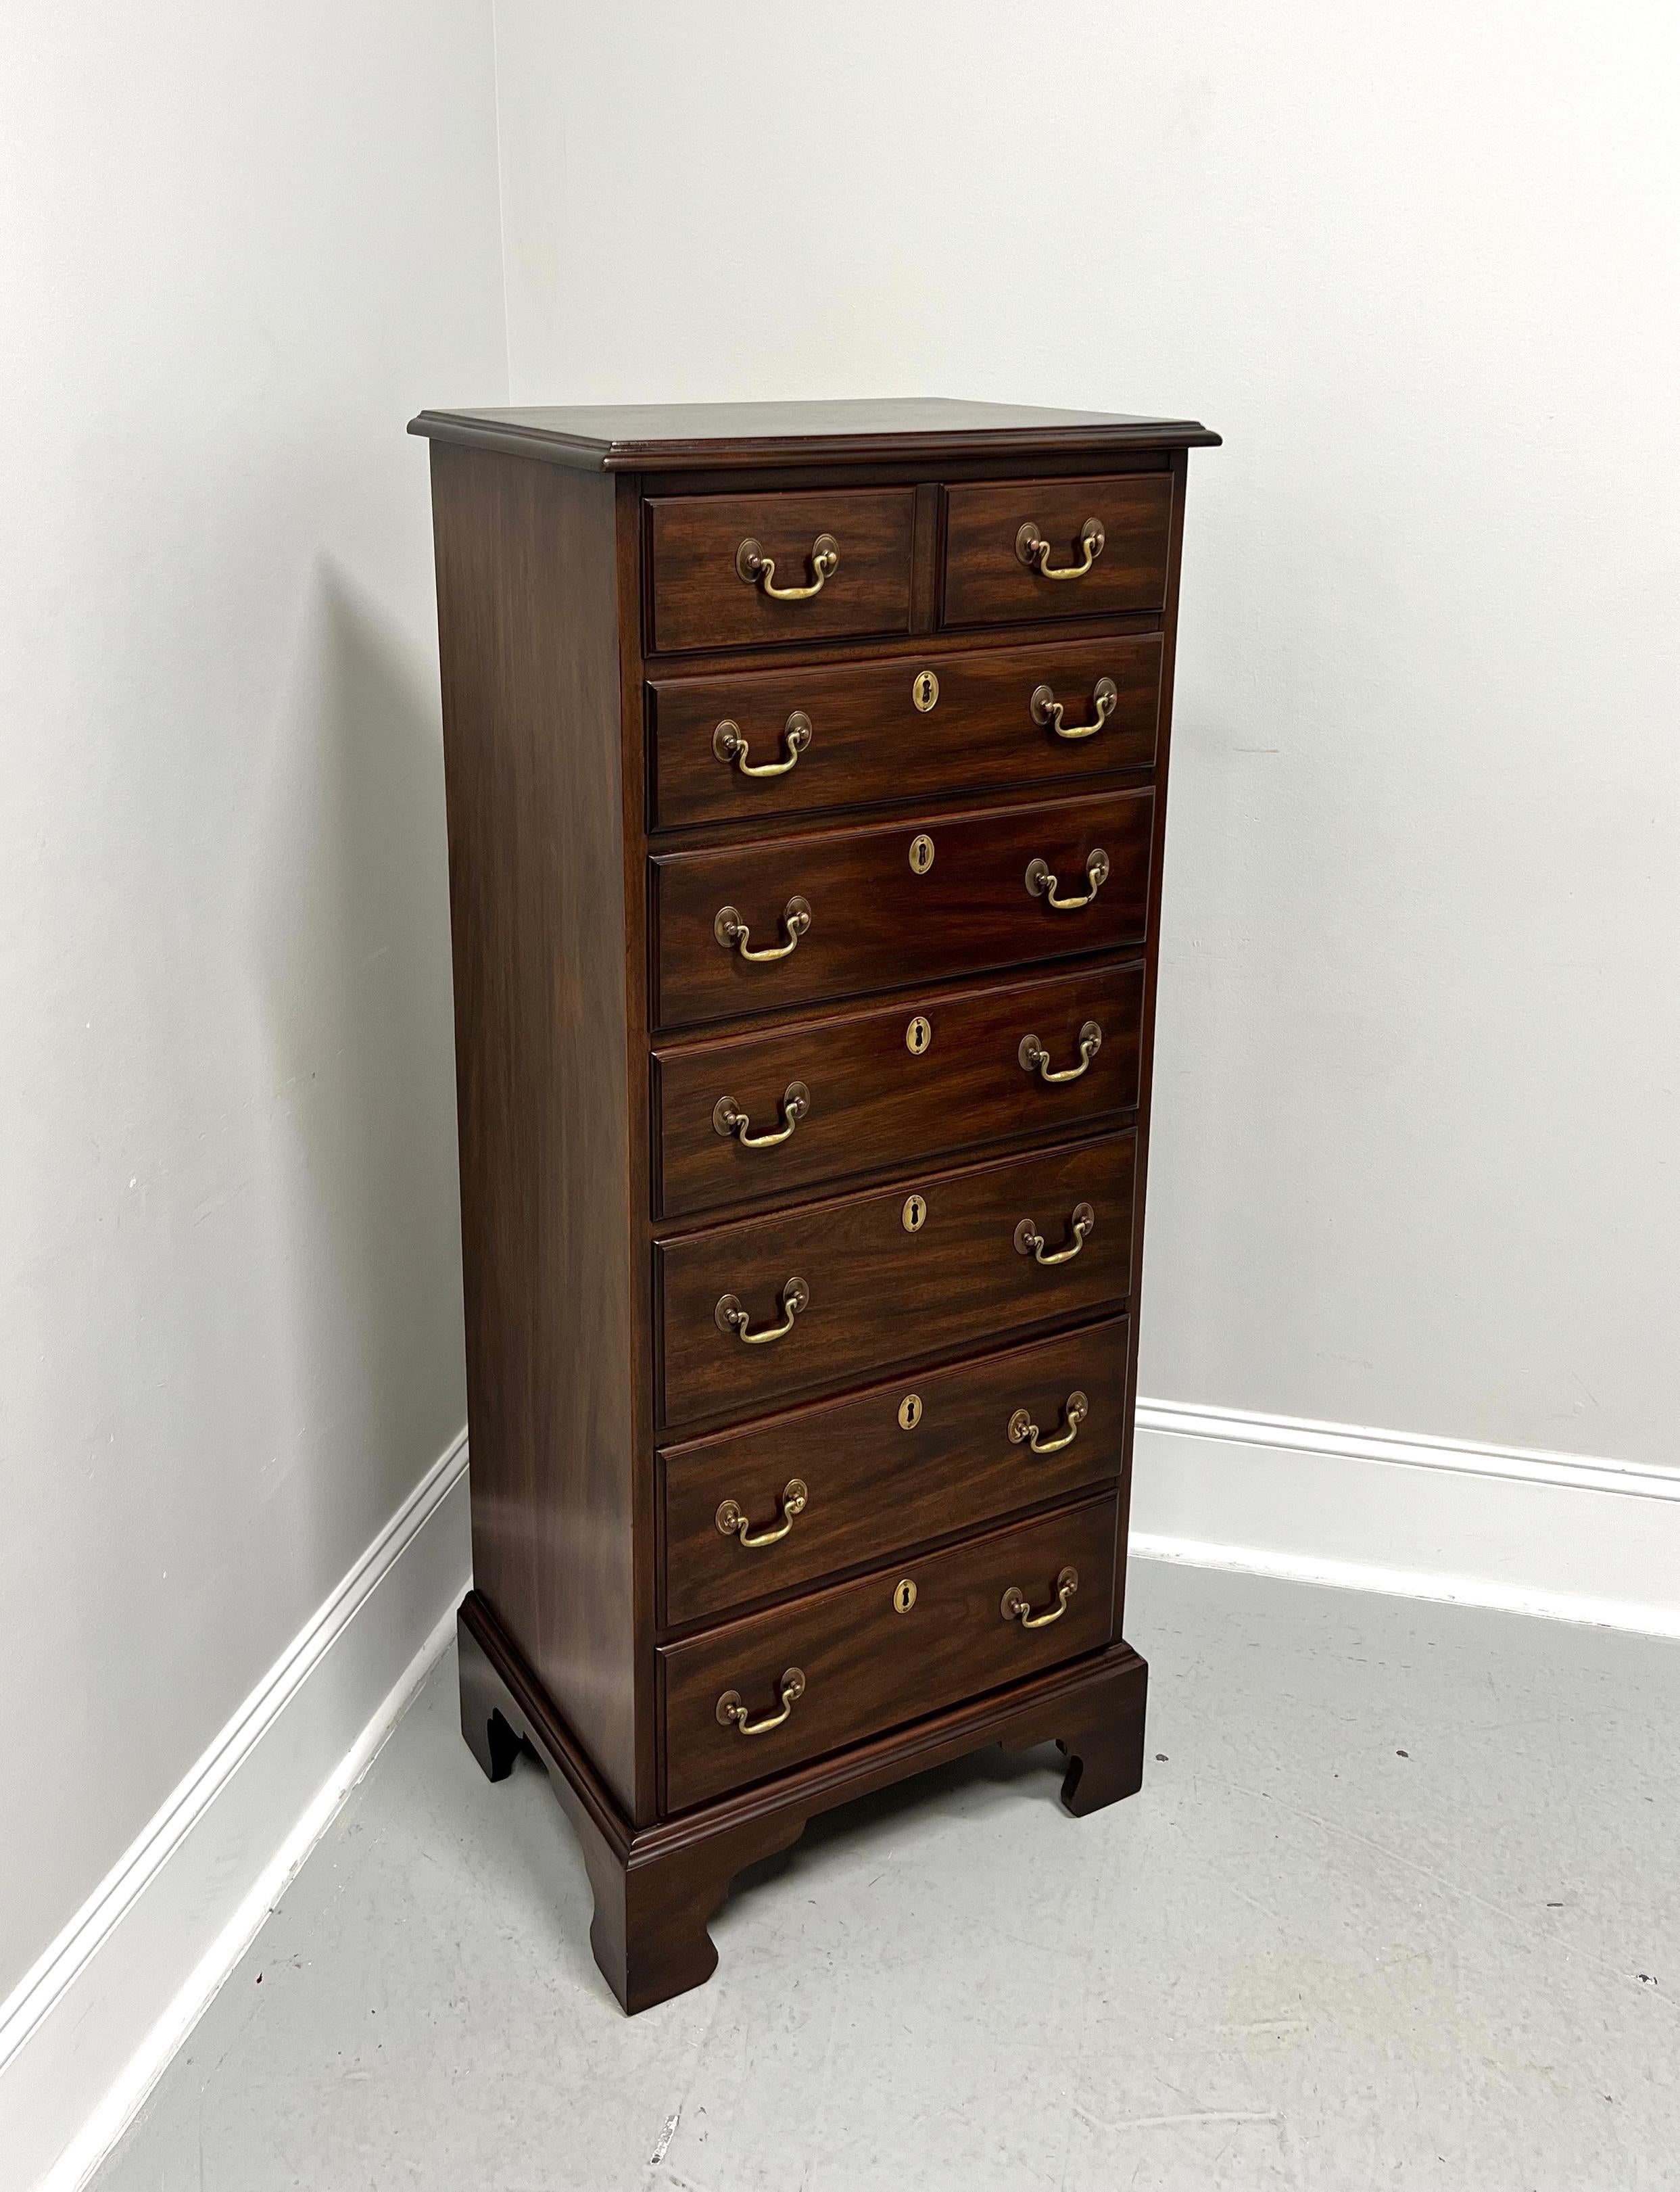 A semainier lingerie chest in the Chippendale style by Henkel Harris, of Winchester, Virginia, USA. Solid mahogany with brass hardware, ogee edge to top, and bracket feet. Features seven drawers of dovetail construction, with top drawer having a